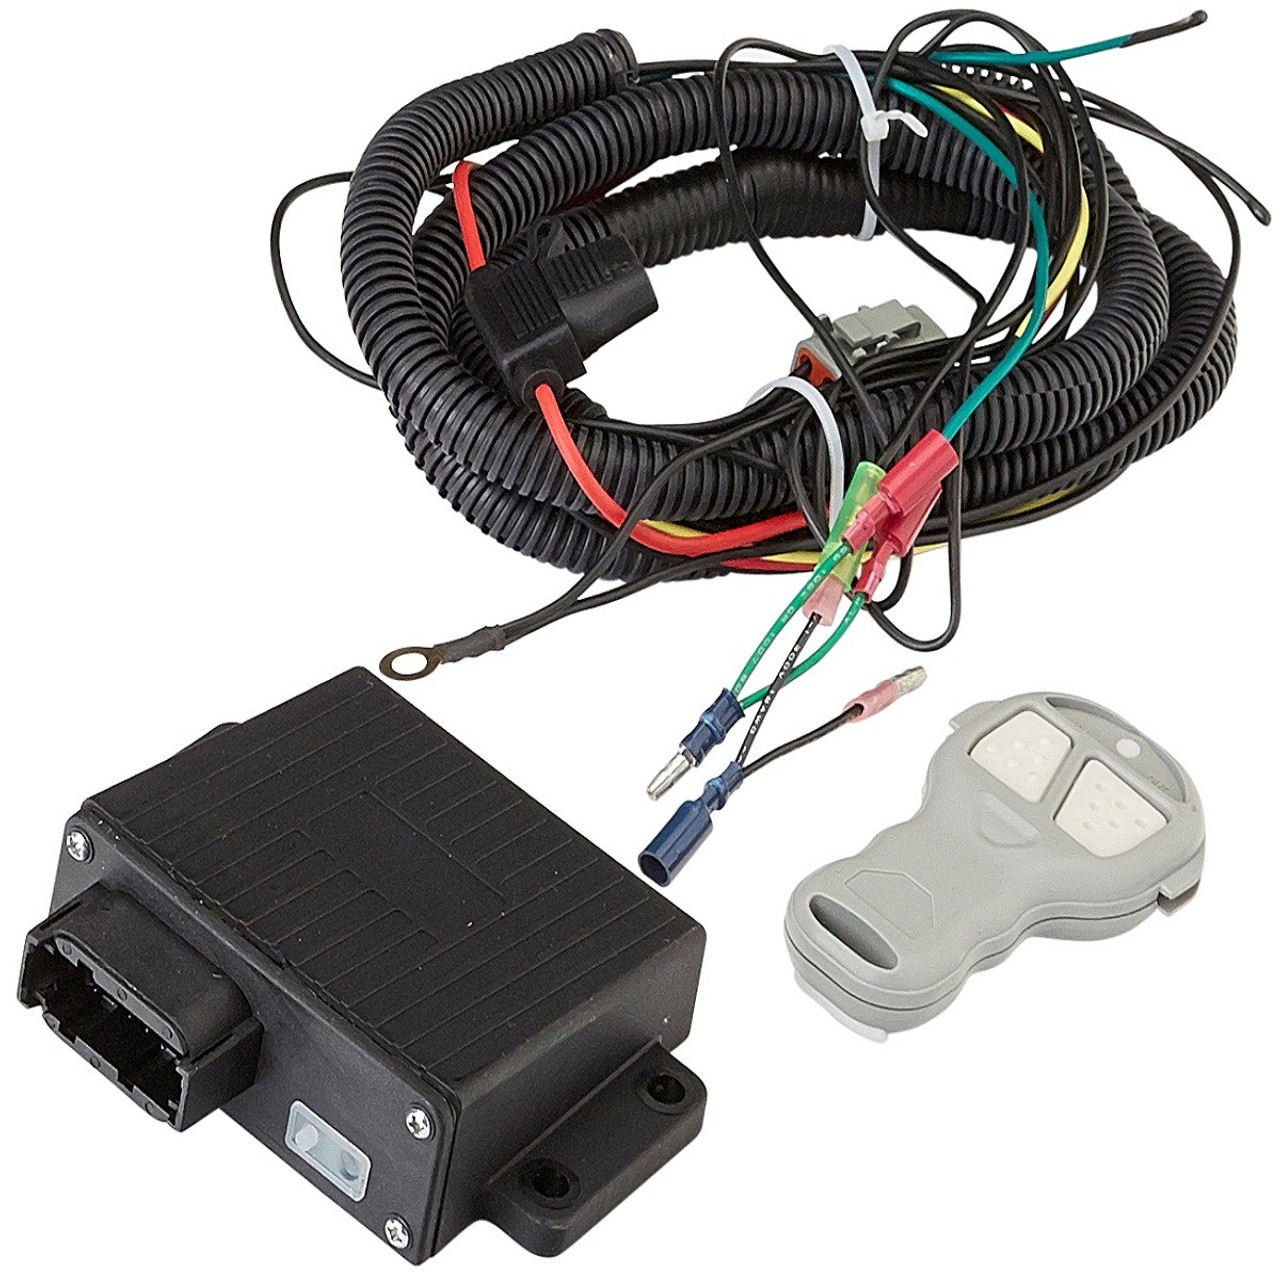 Viper Elite Synthetic Cable Winch